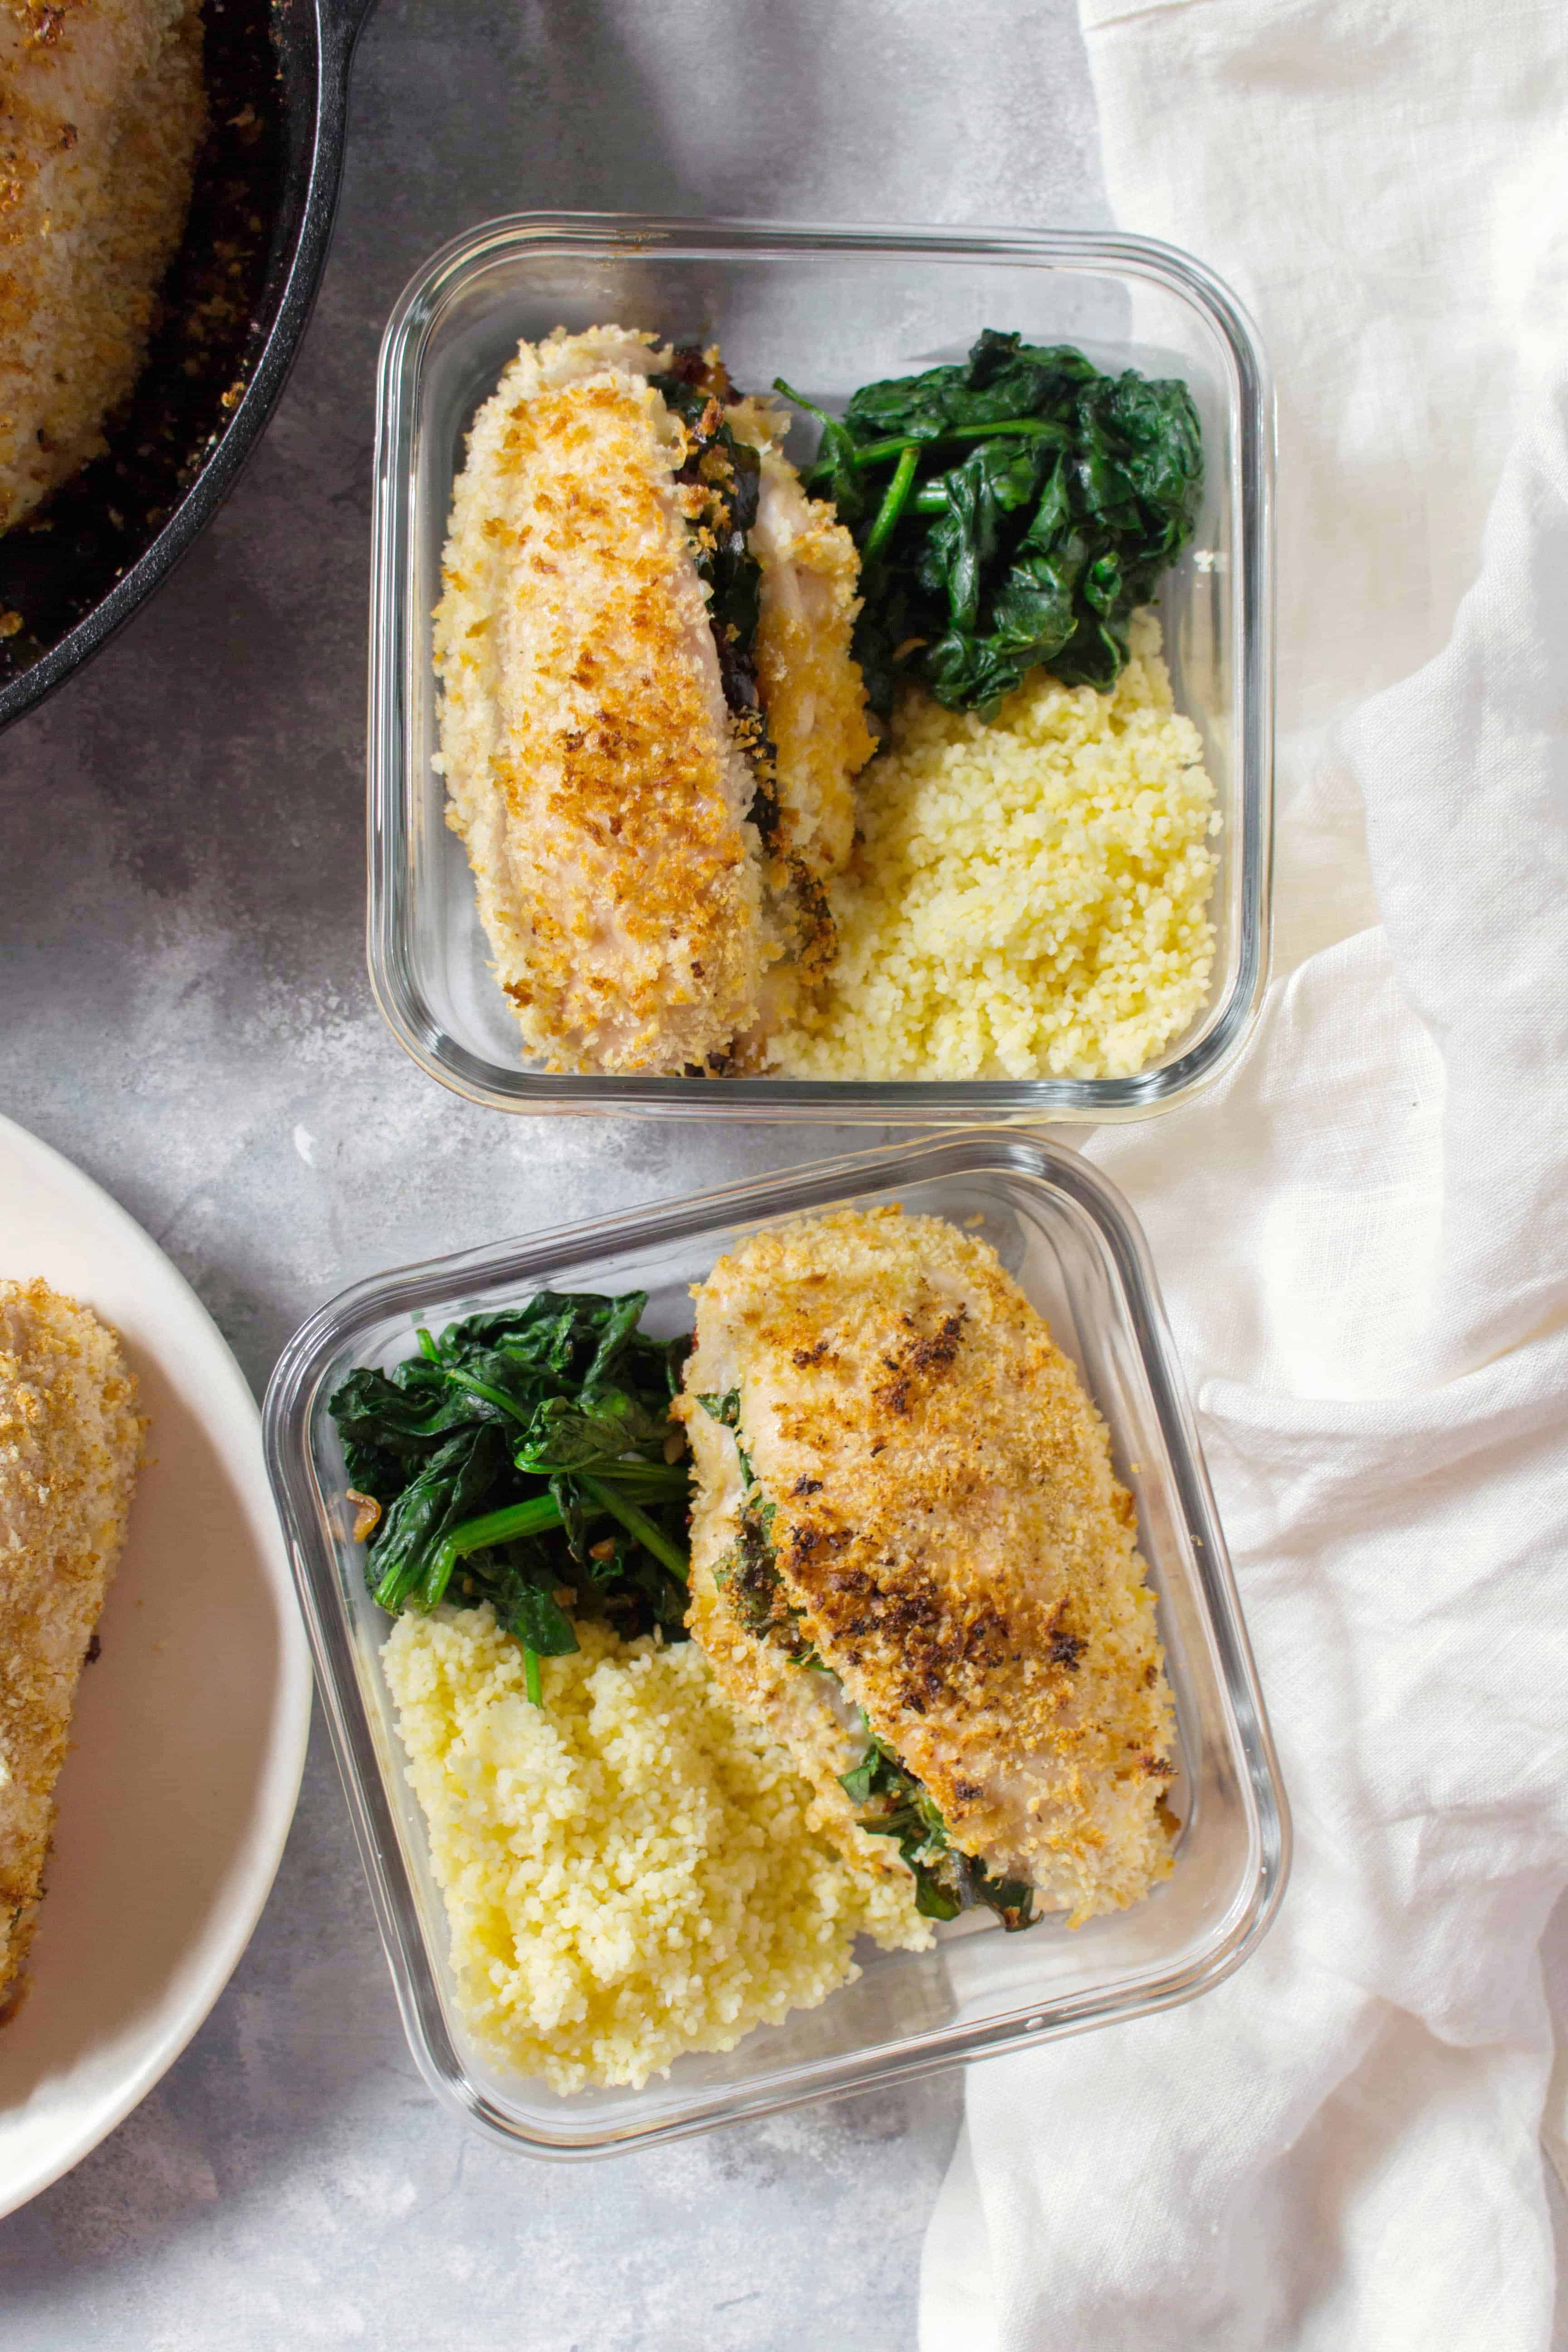 Looking to change up your regular boring chicken meal prep? This Spinach, Sun Dried Tomato, and Cheese Stuffed Chicken Meal Prep will have you asking for more as it is stuffed with flavour without having to spend time marinating!